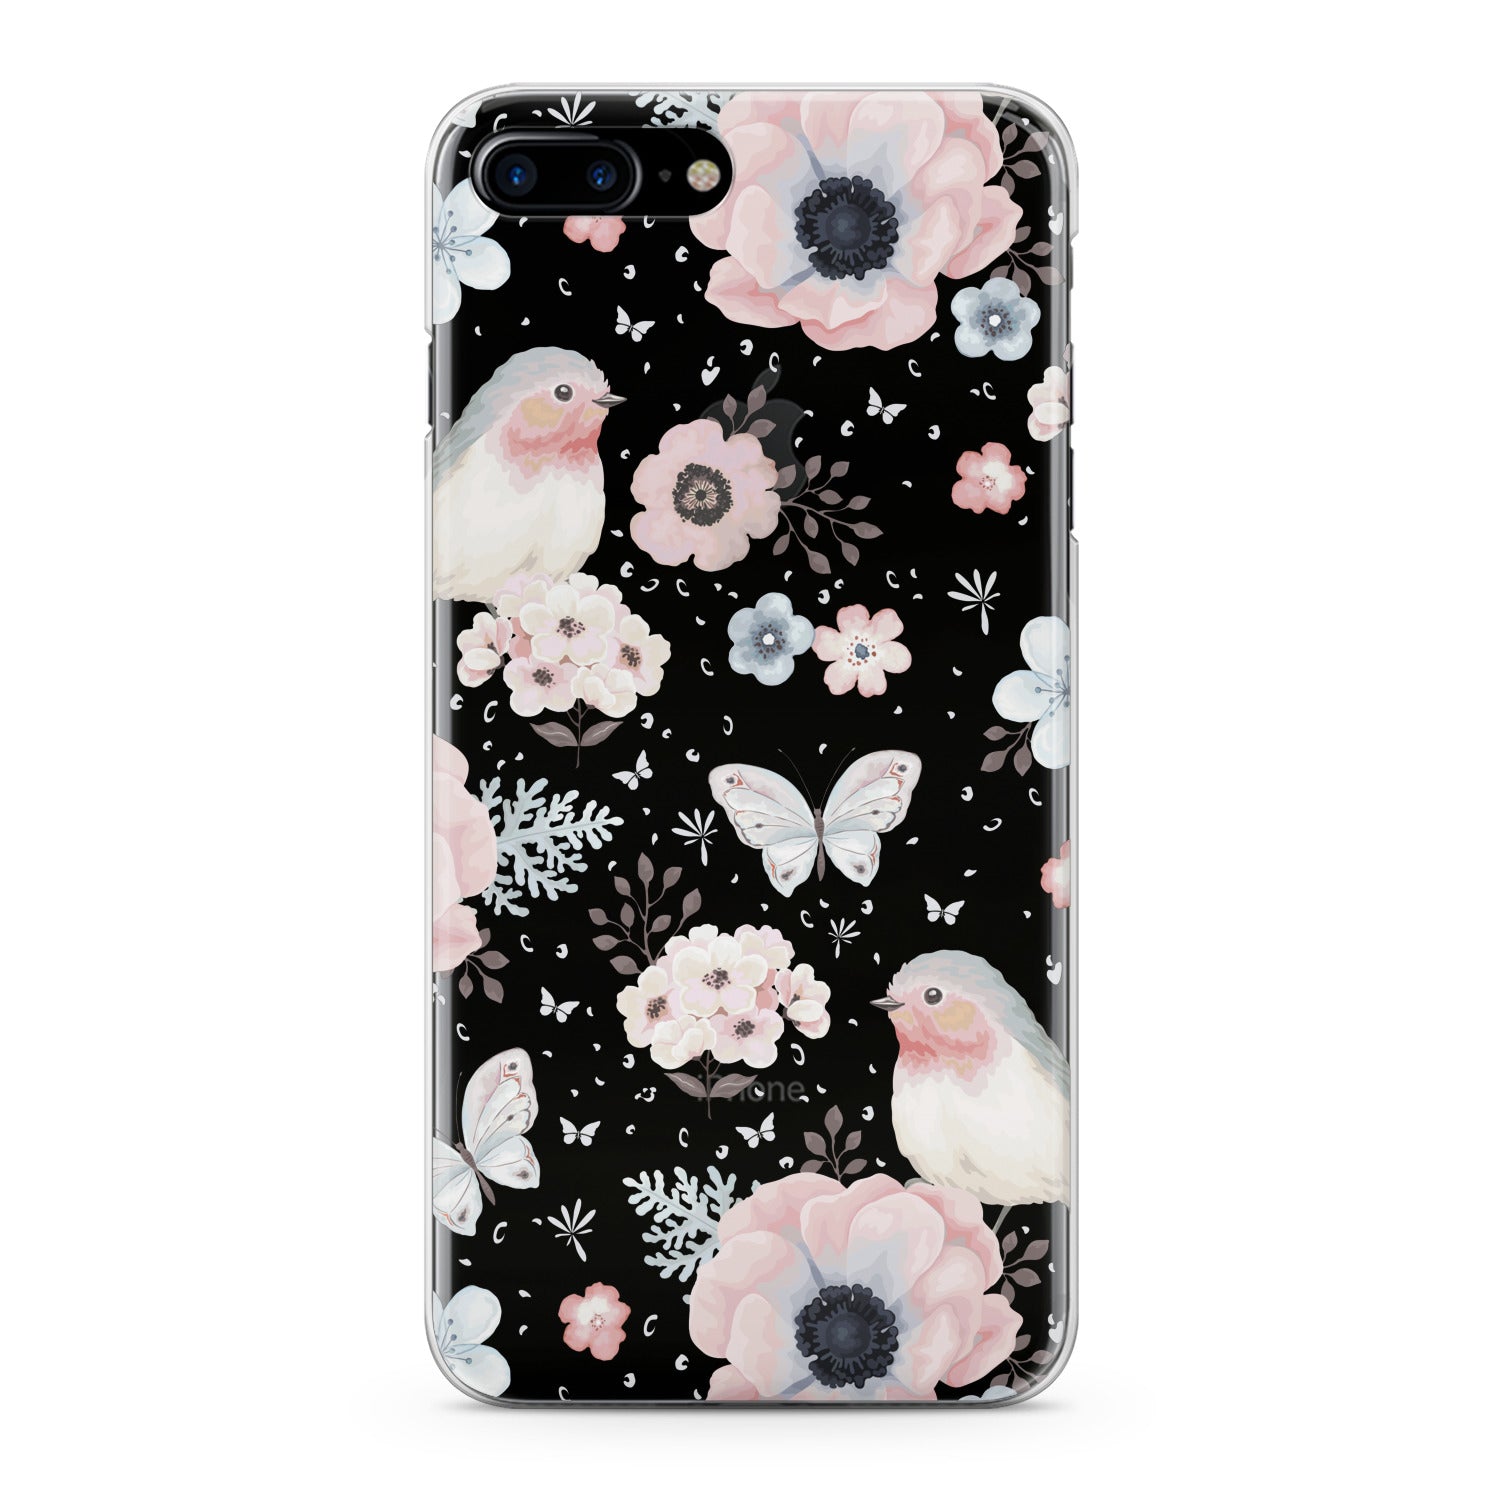 Lex Altern Pink Spring Phone Case for your iPhone & Android phone.